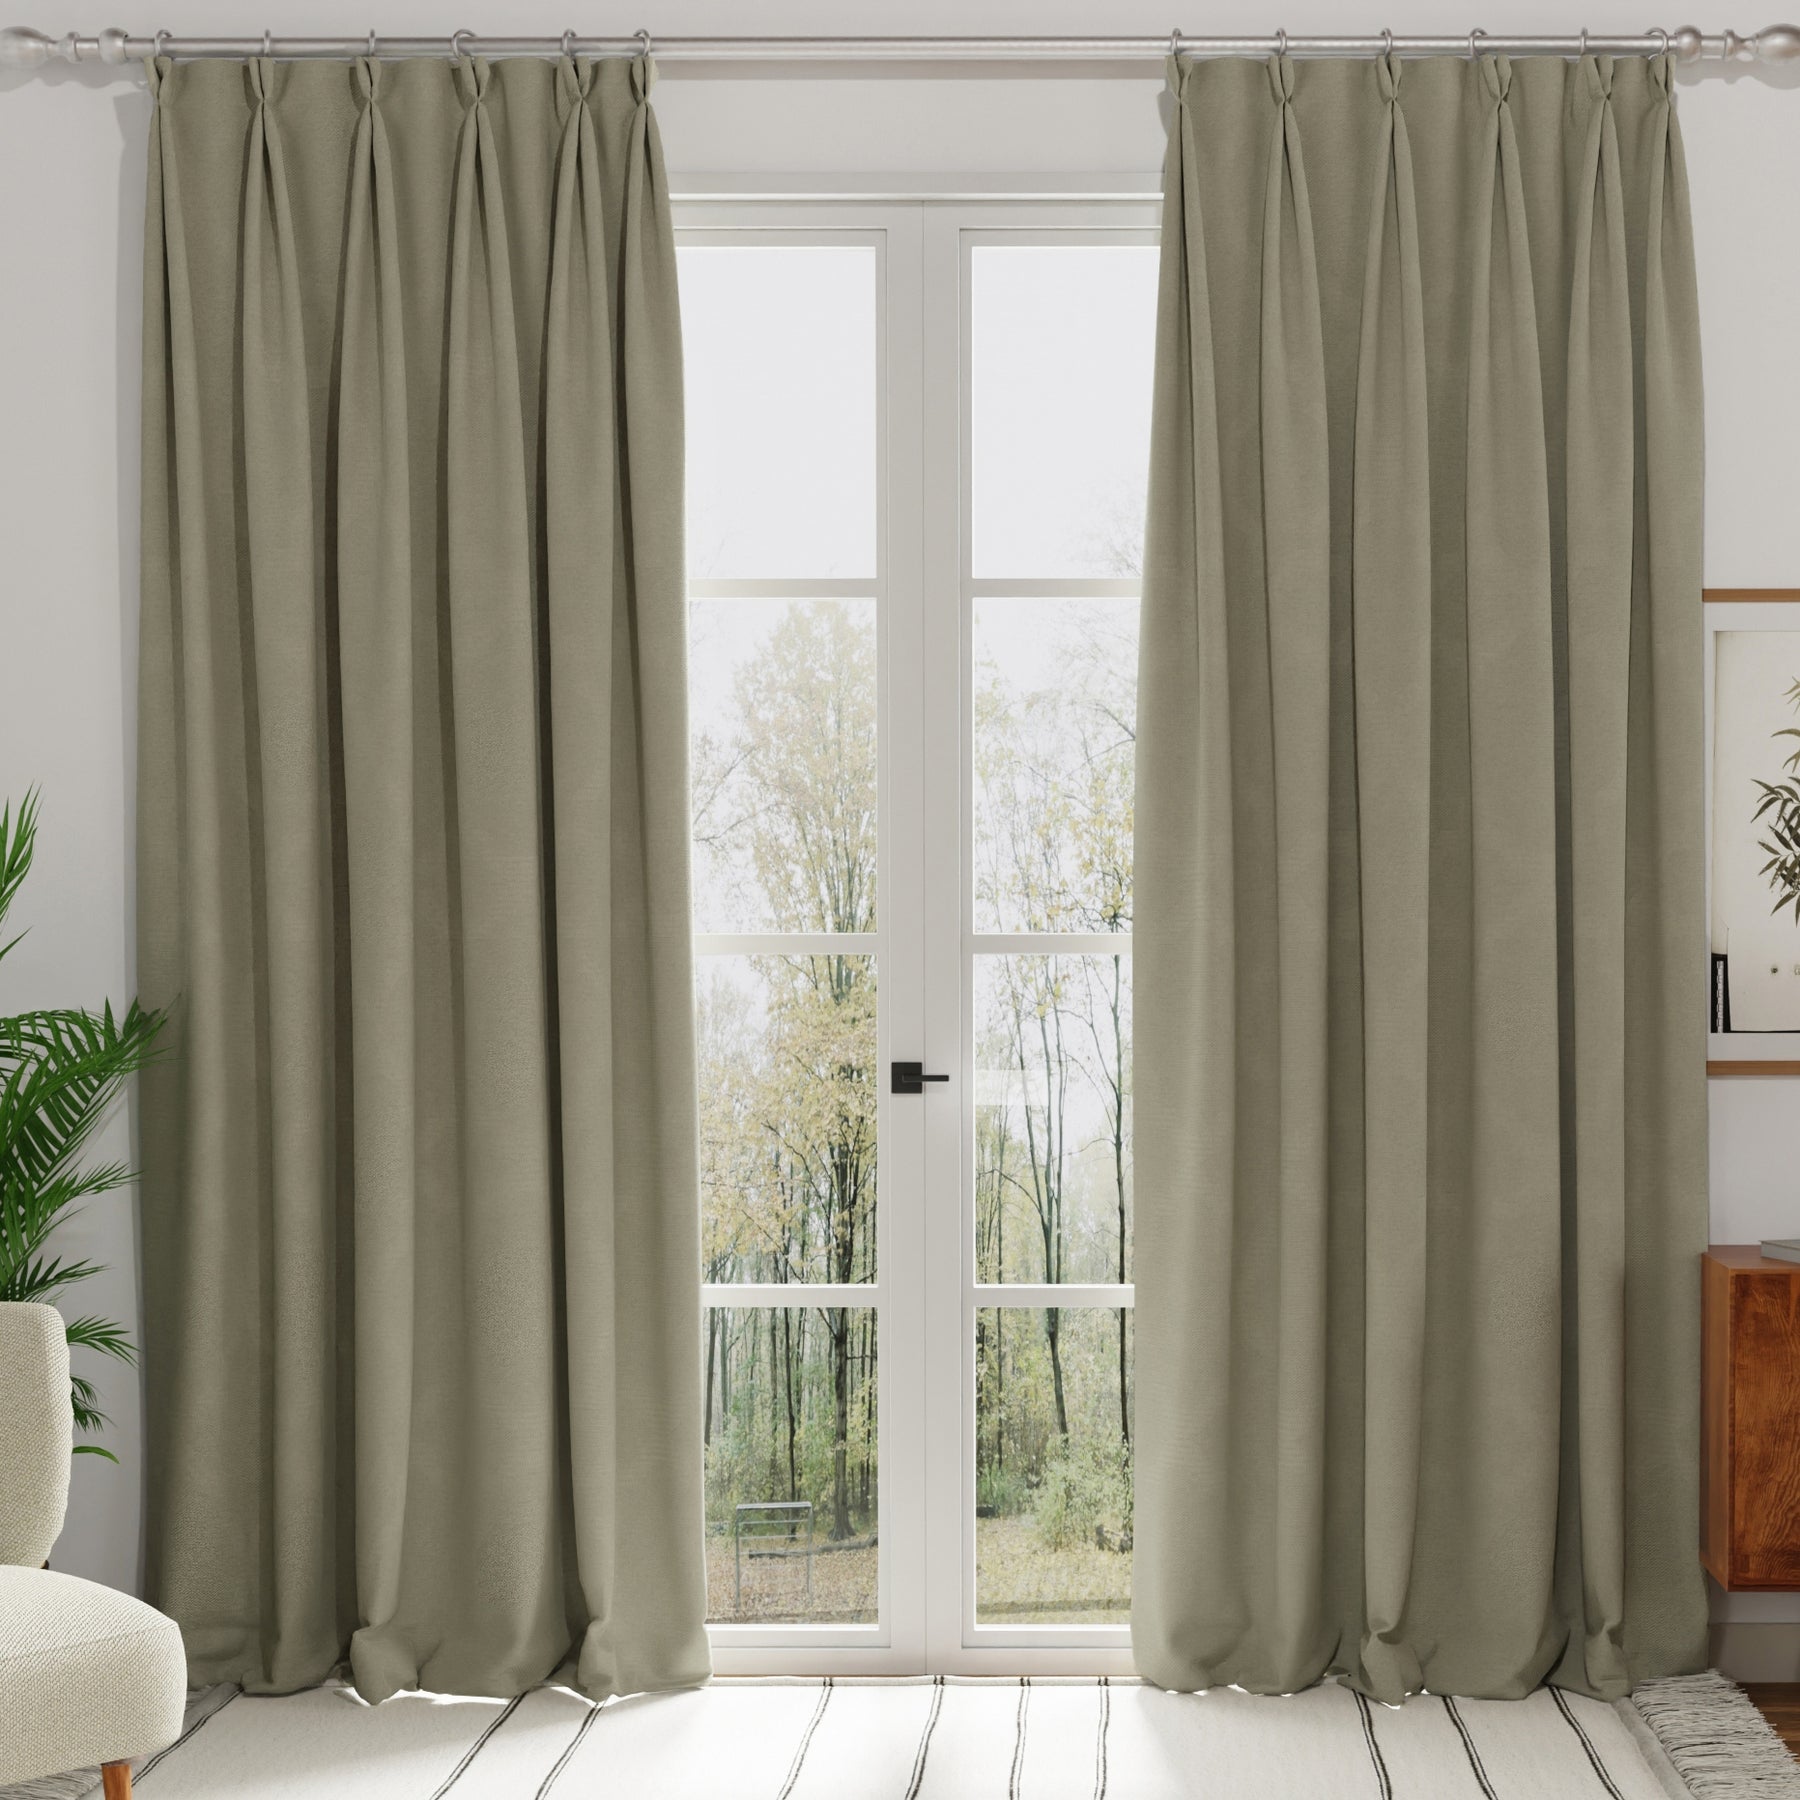 Modena Recycled Made To Measure Curtains Mist